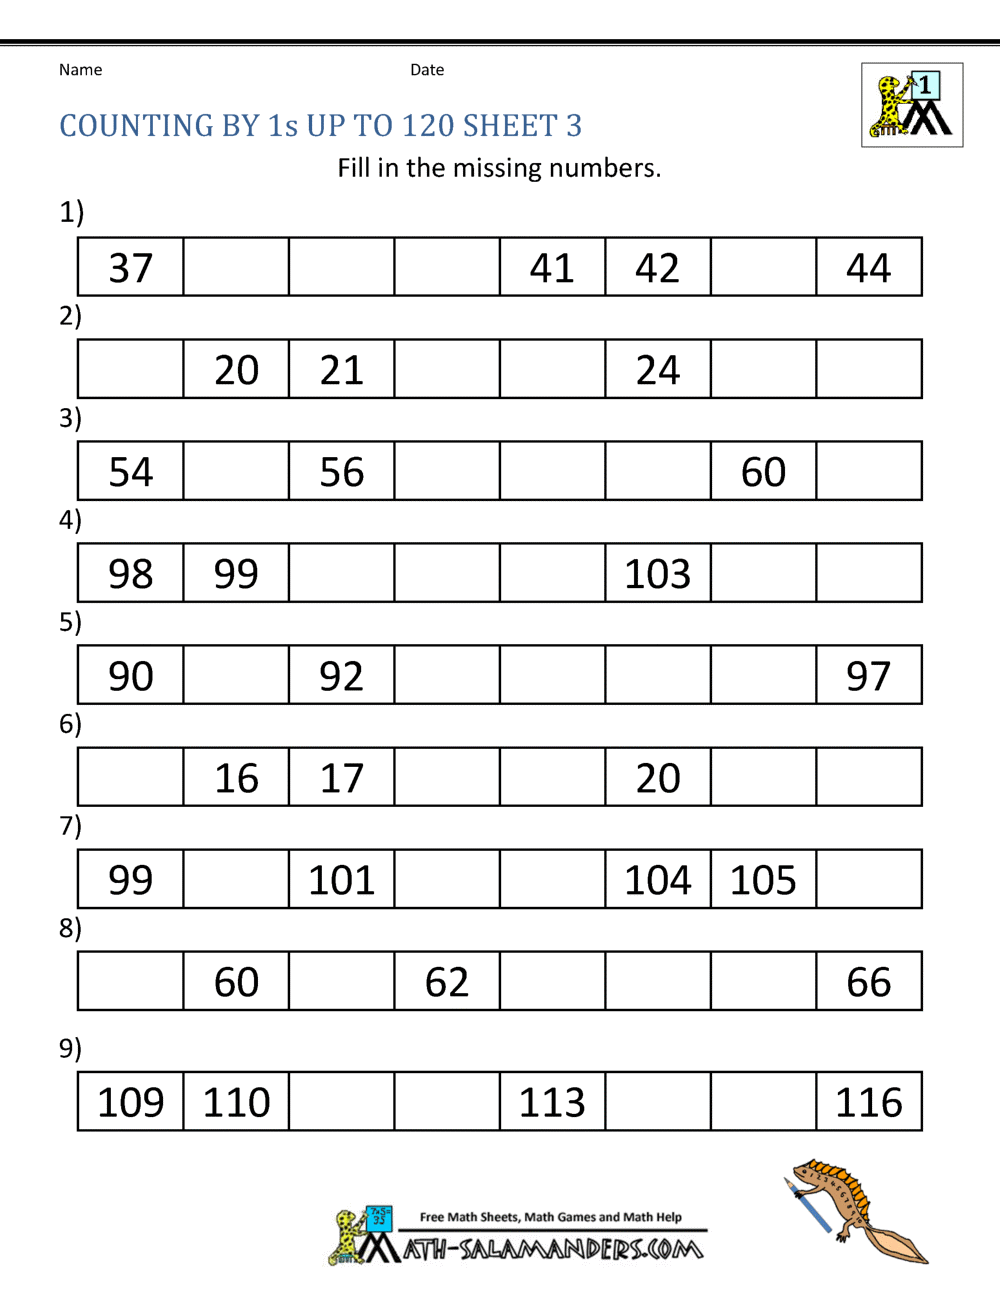 1111st Grade Math Worksheets Counting by 1111s 11s and 11111s Regarding Counting In 5s Worksheet